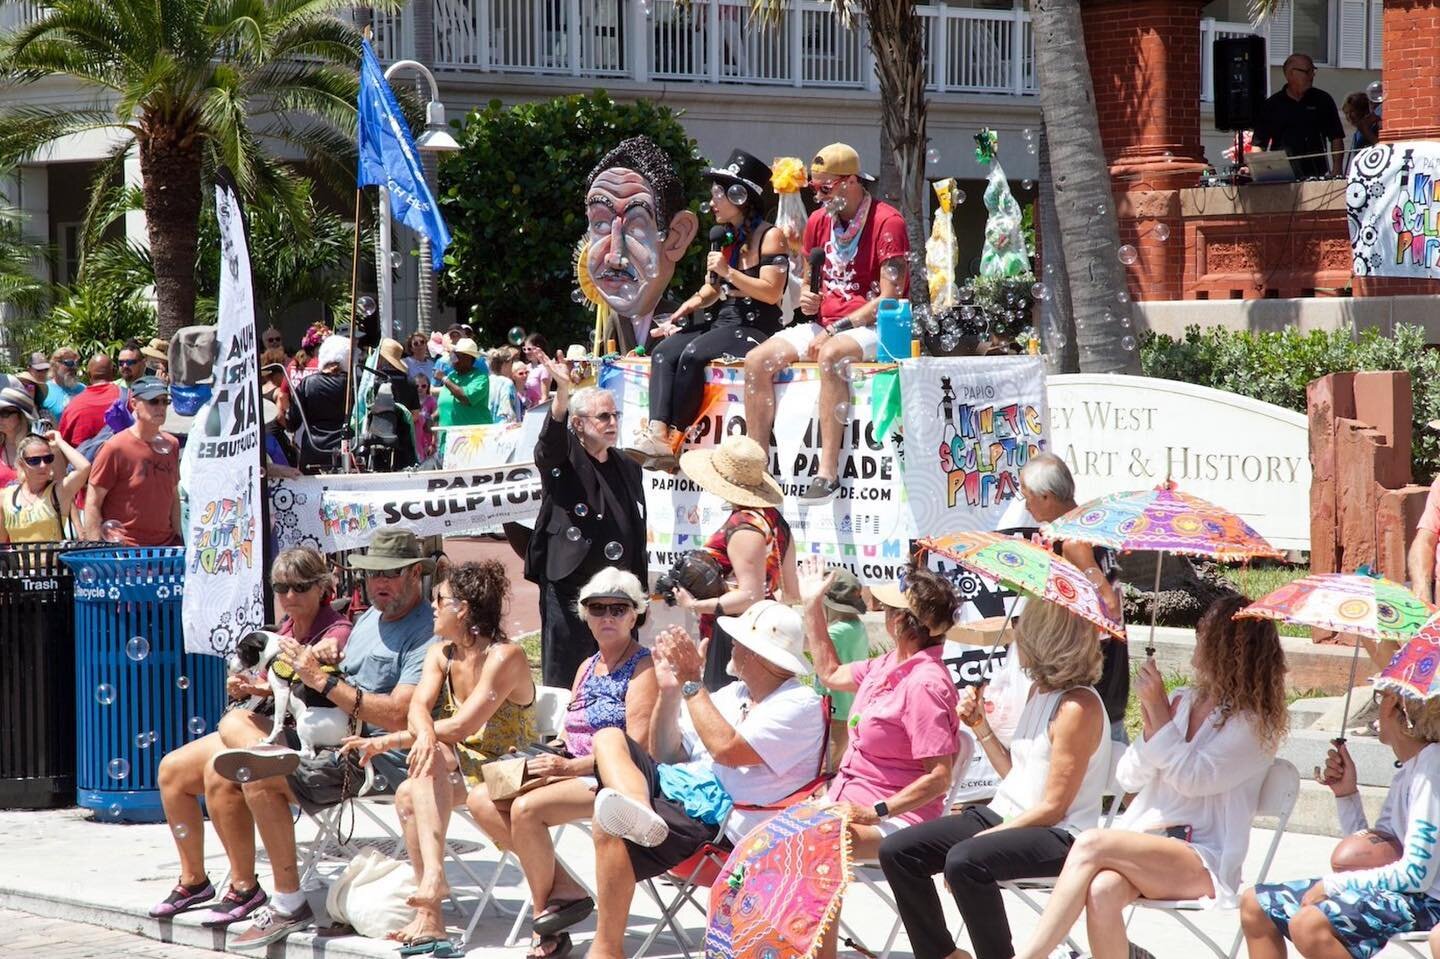 TODAY IS THE DAY! 🥳
The parade leaves the Historic Custom House at noon and rolls down Duval street to the Southernmost pocket park for an after party- Papio style!🔅
.
.
.
.
.
#keywest #papio #papiokineticparade #parade #duval #duvalstreet #keywest